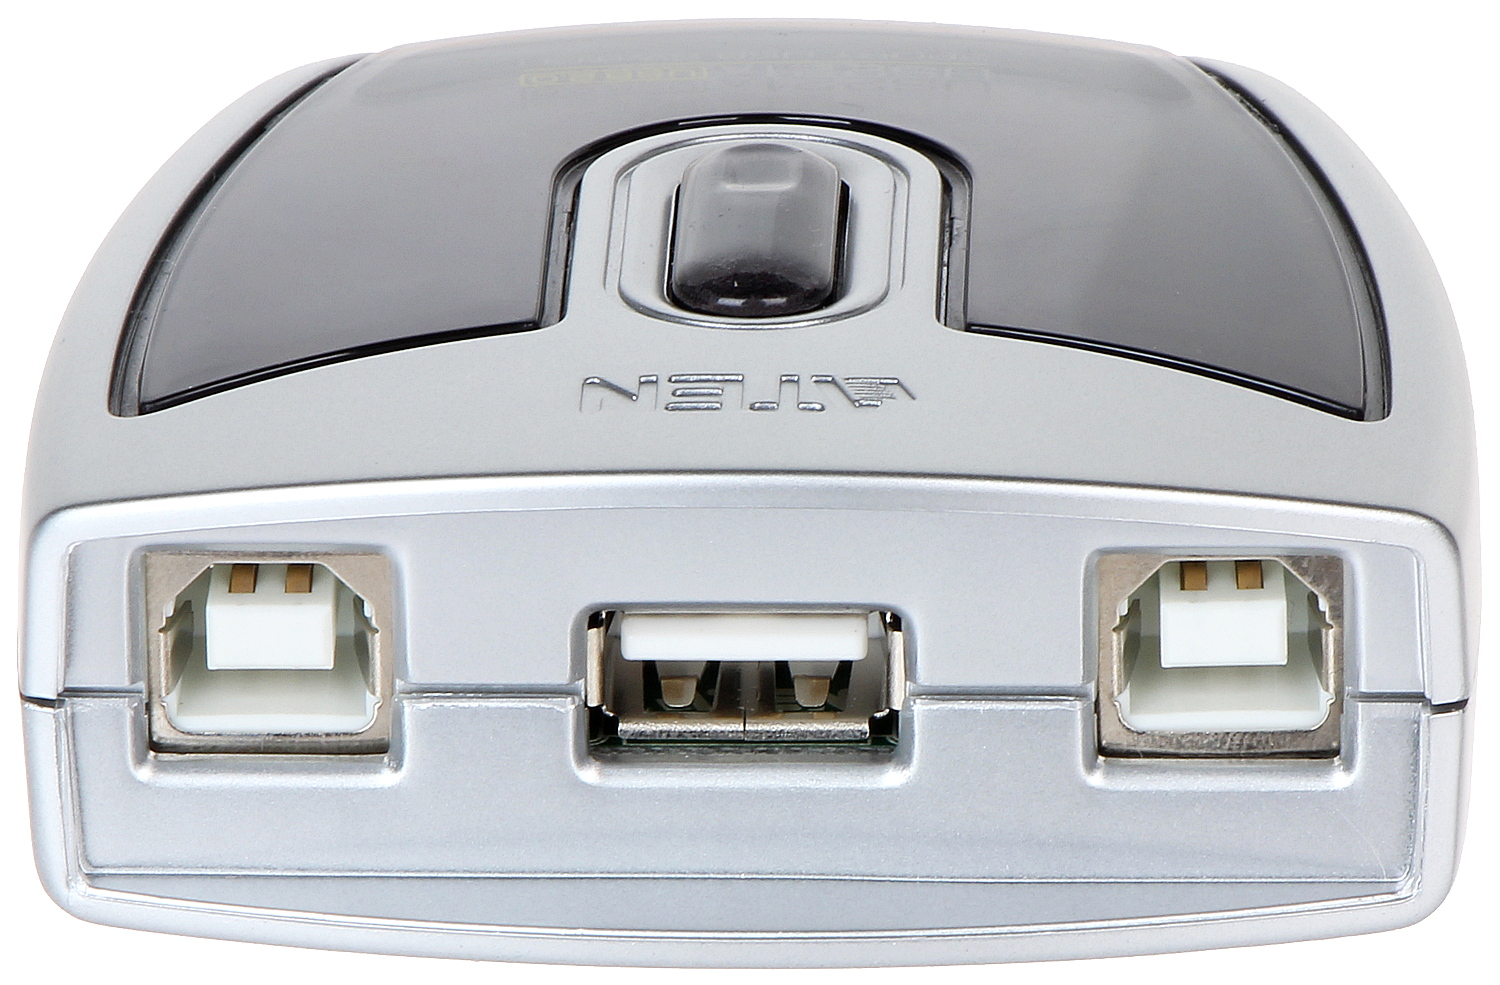 USB SWITCH US-221A ATEN - USB switches and splitters - Delta